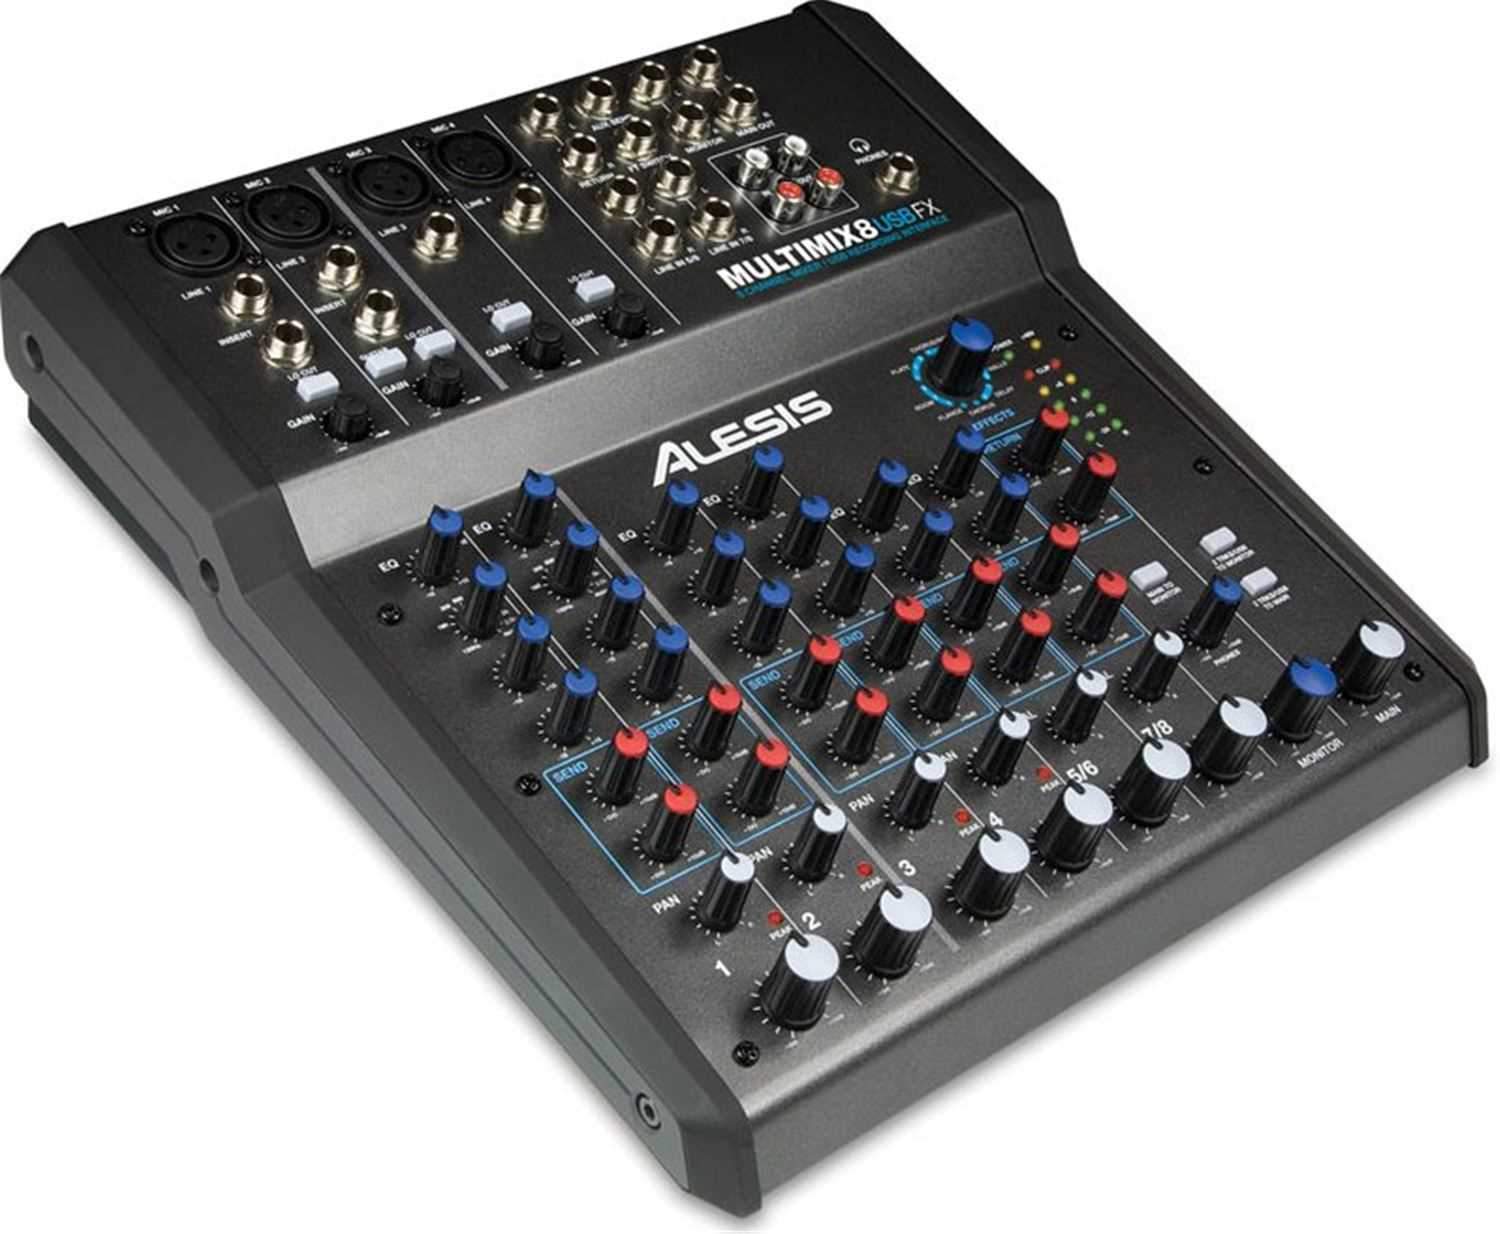 Alesis MultiMix-8-USB-FX 8 CH Mixer with Effects/USB - PSSL ProSound and Stage Lighting